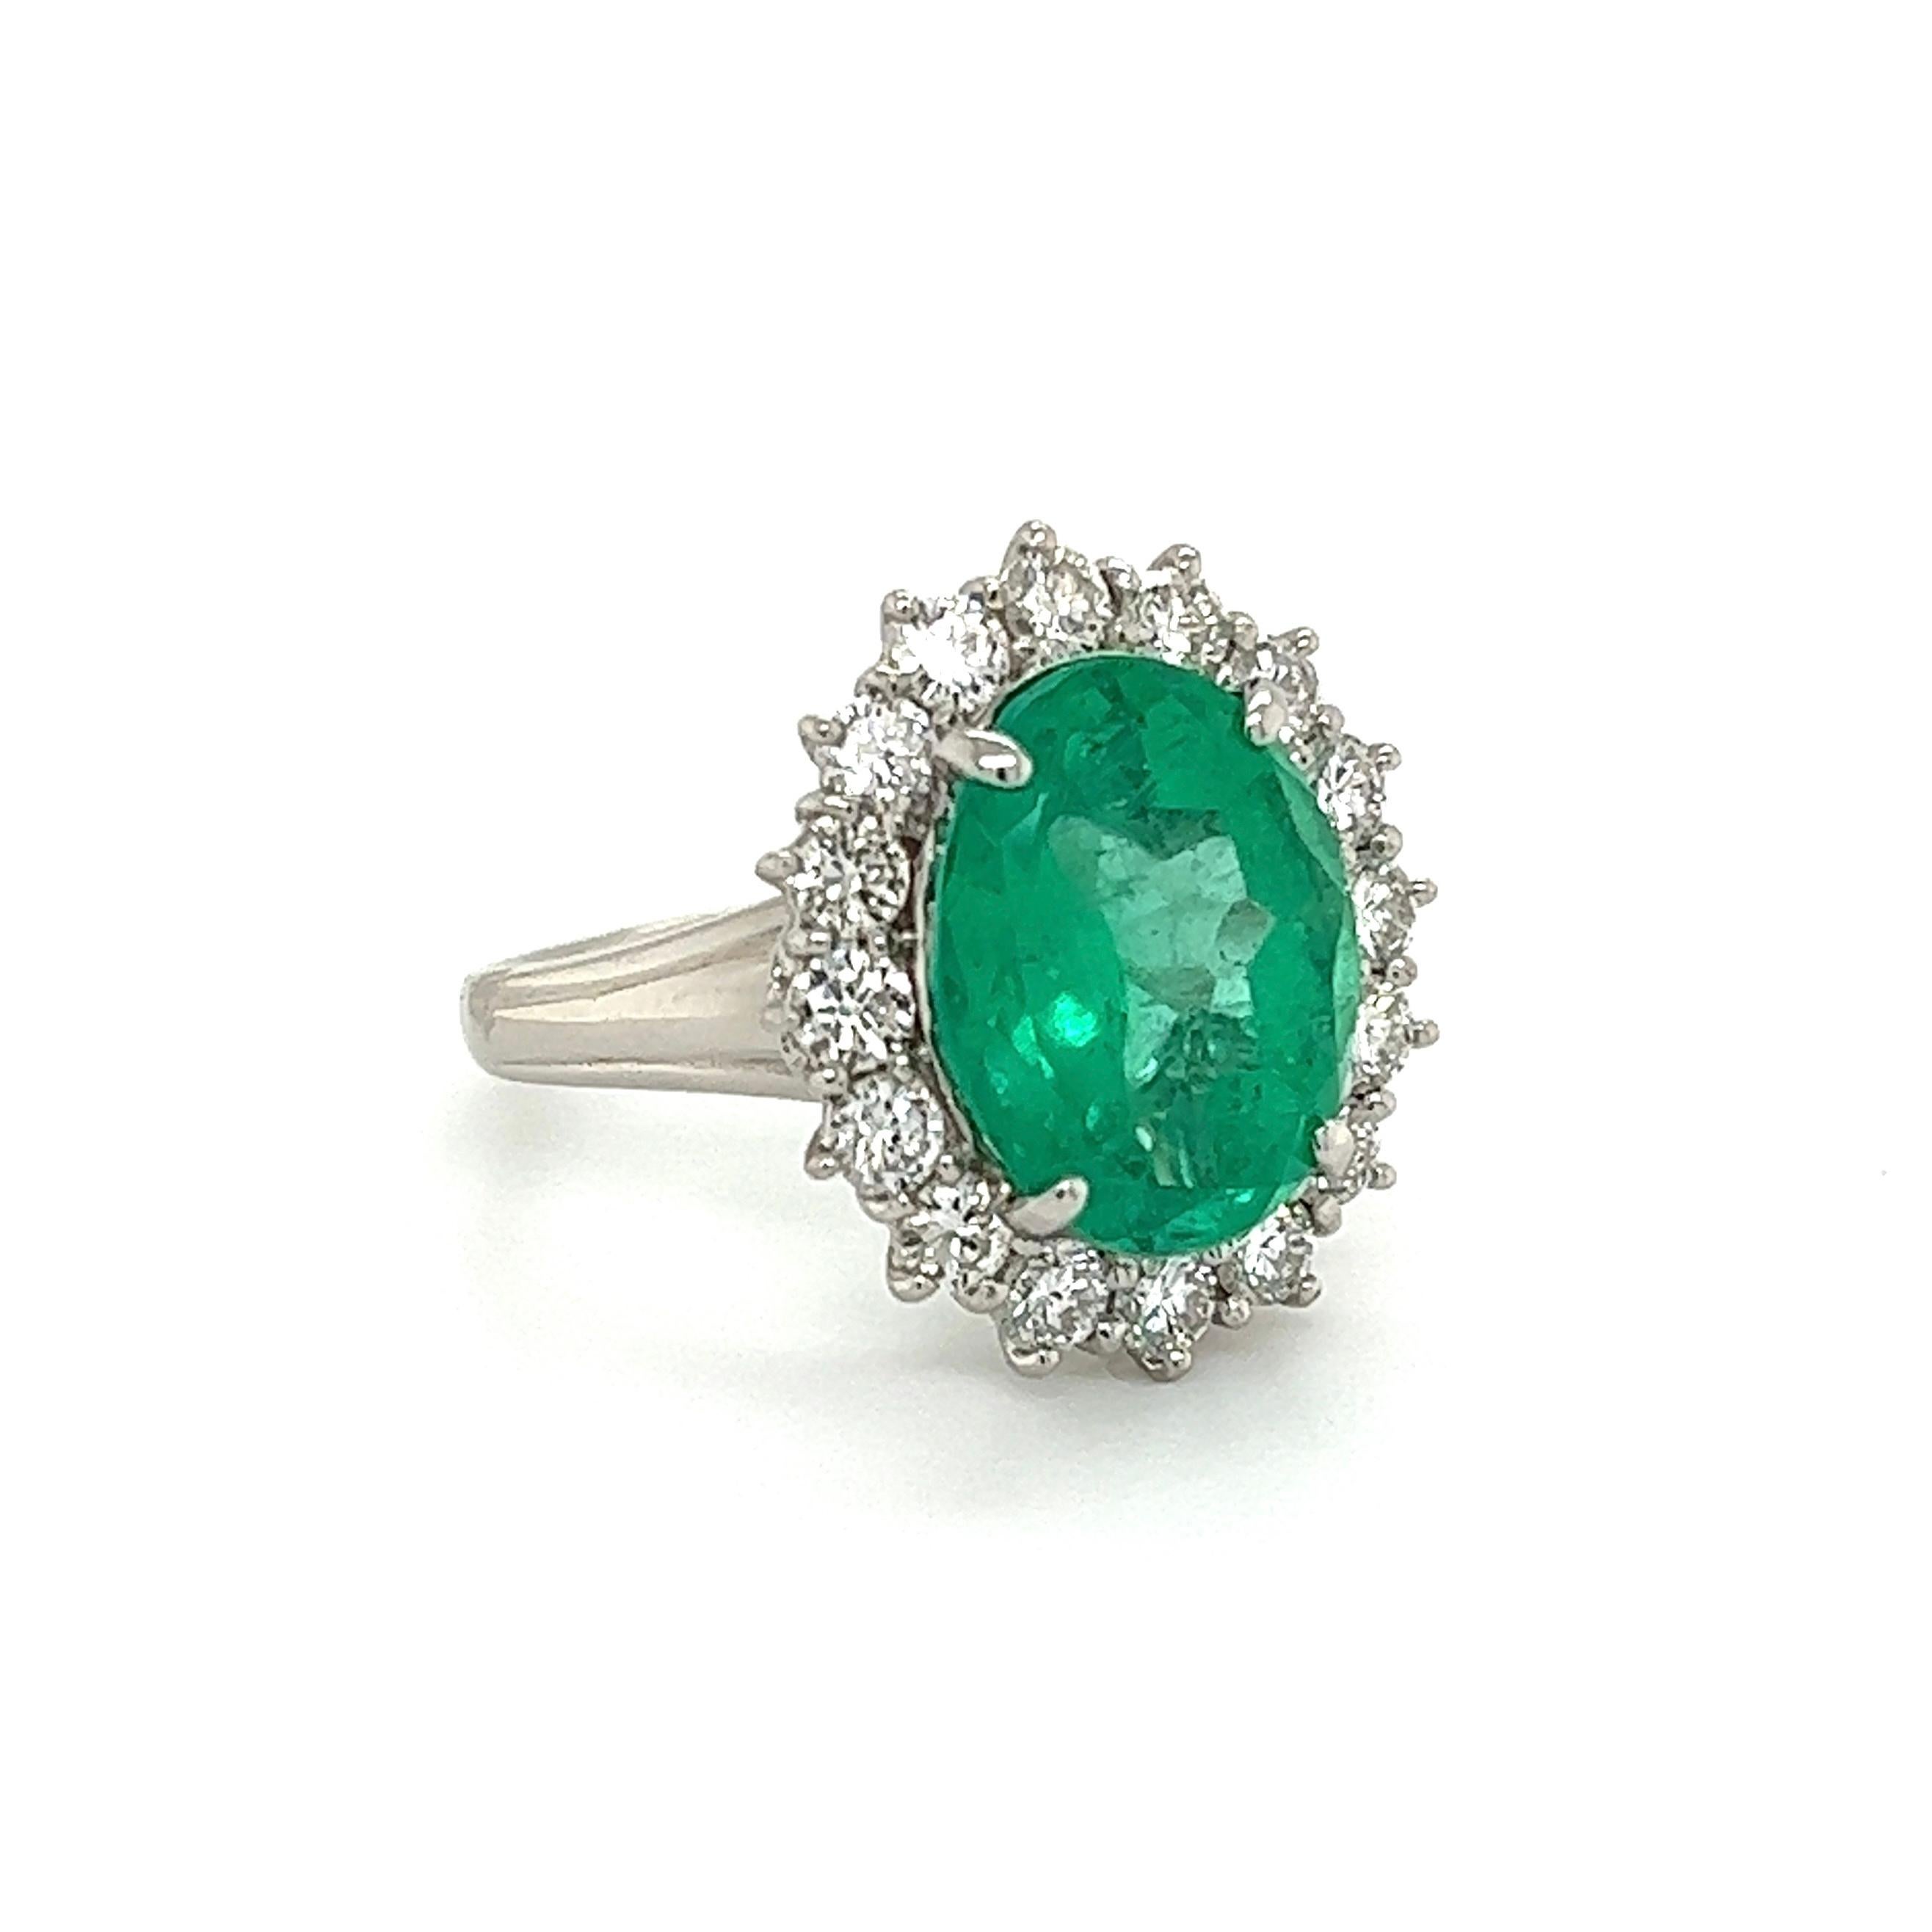 Simply Beautiful! Finely detailed Emerald and Diamond Platinum Ring. Centering a securely nestled Hand set 7.09 Carat Oval Columbian Emerald GIA #5222270569, surrounded by Diamonds, weighing approx. 1.38tcw. Hand crafted Platinum mounting. Approx.